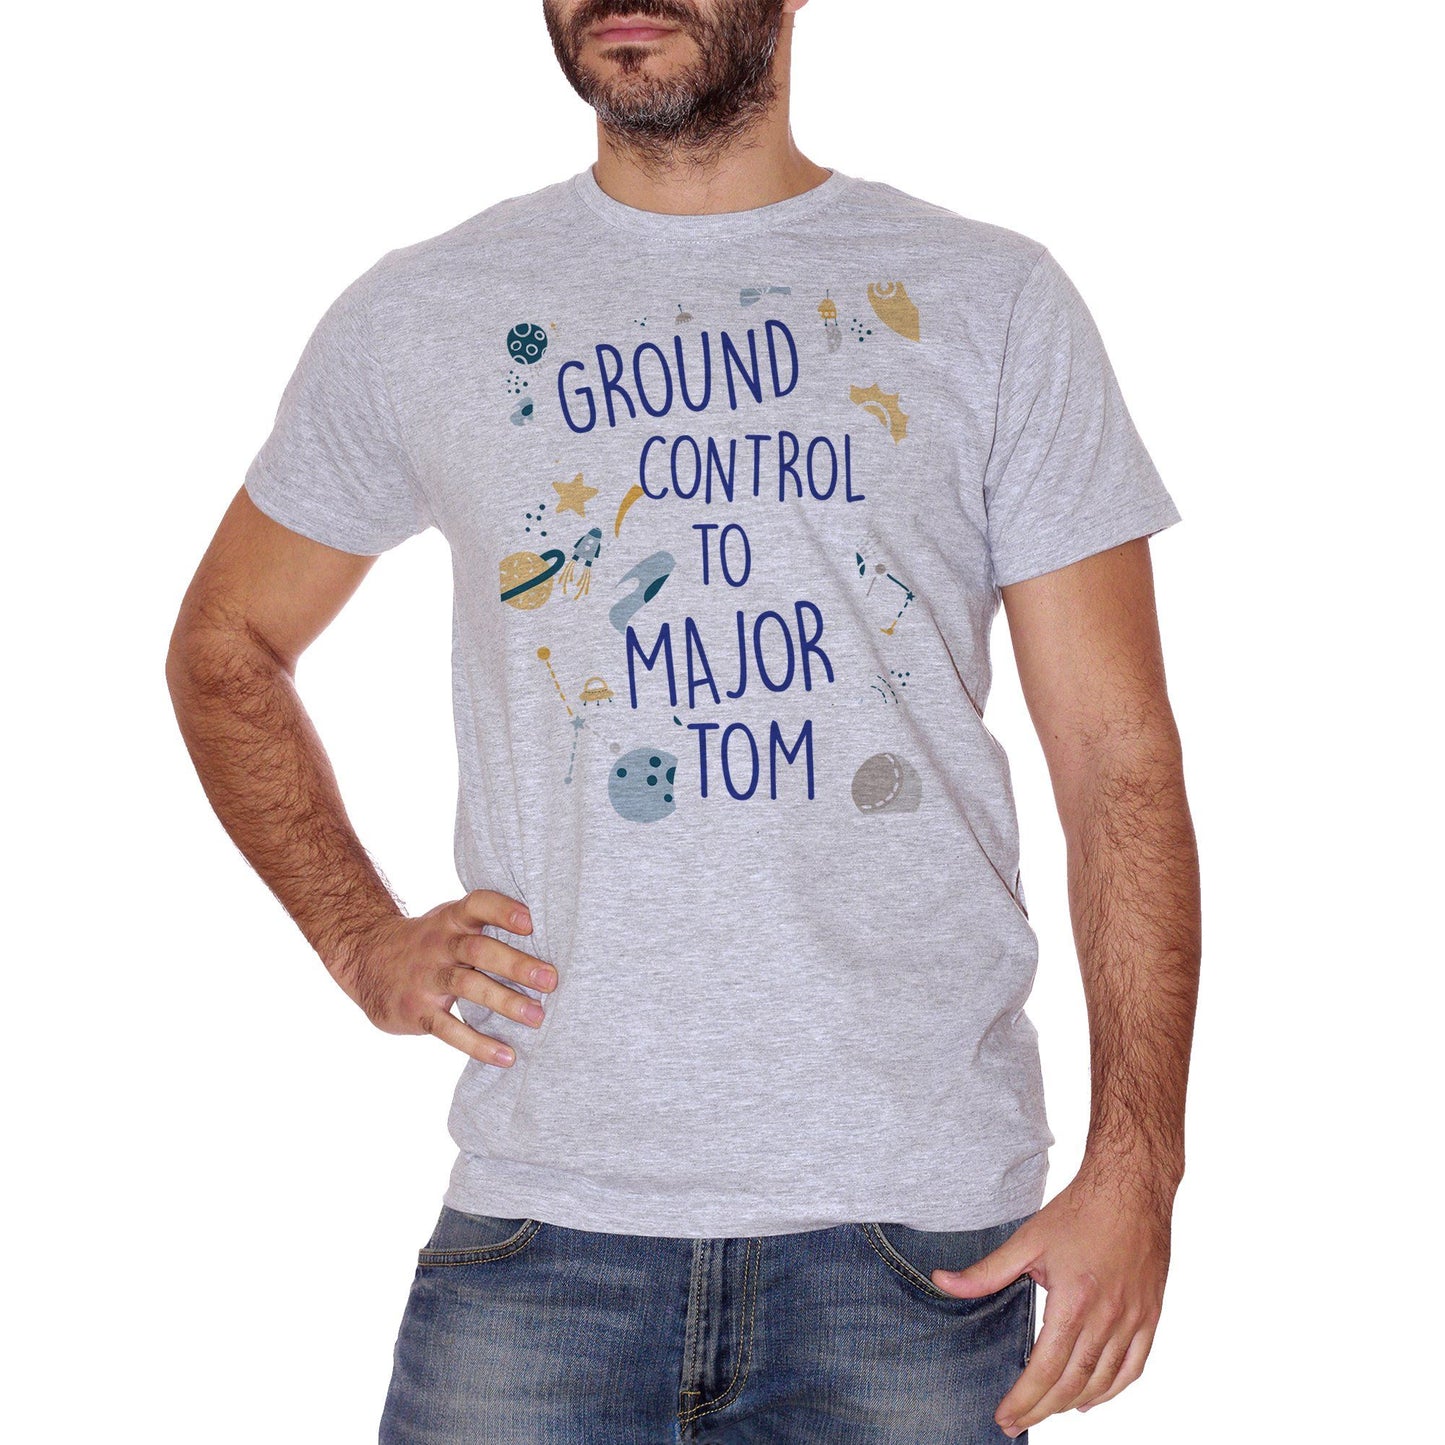 Gray T-Shirt Ground Control To Major Tom David Bowie-Space Oddity Song Canzone - MUSIC CucShop